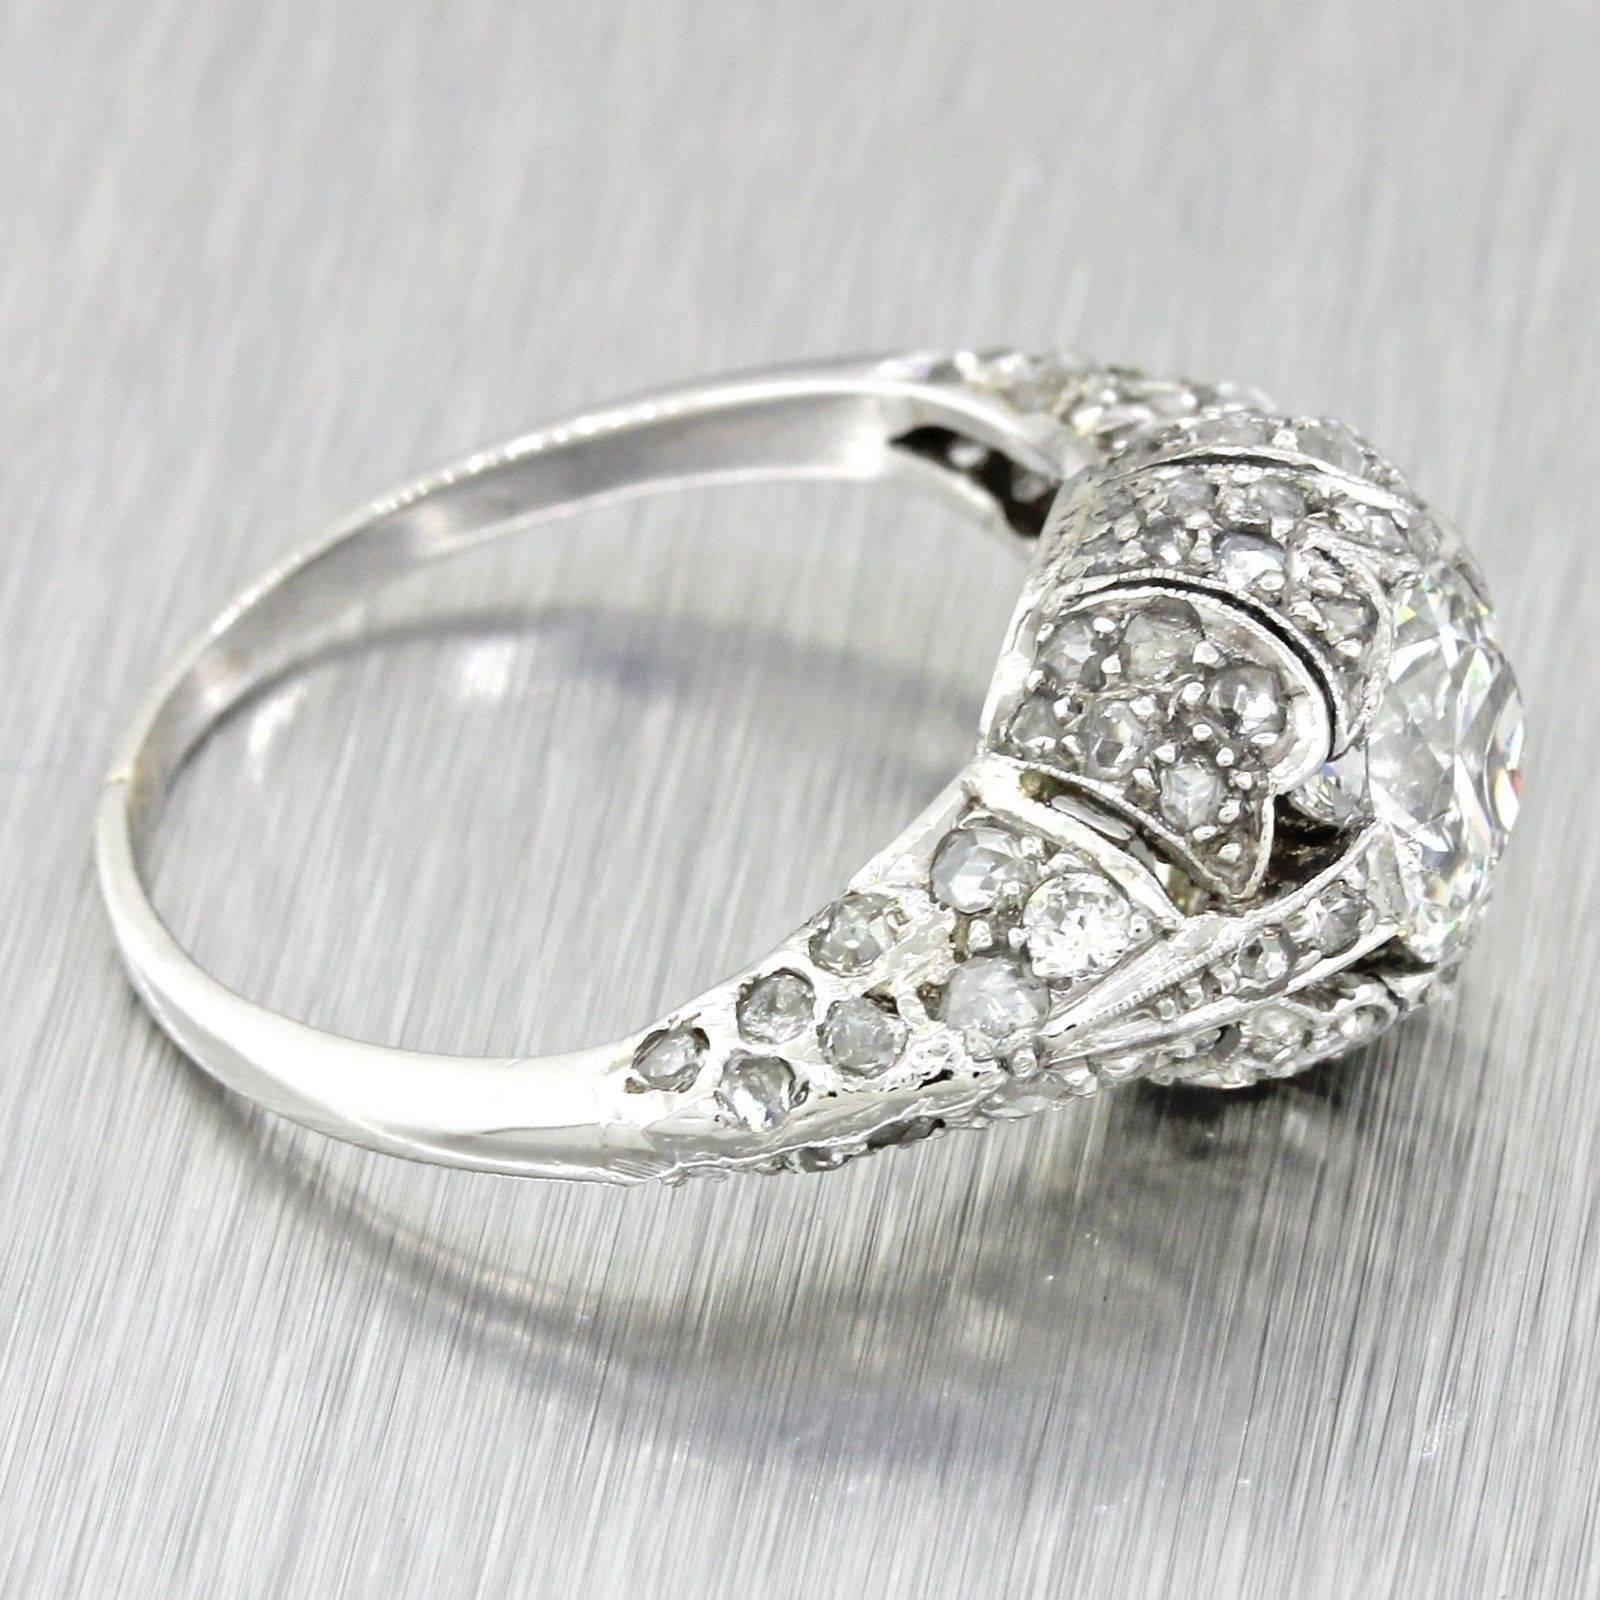 This is a beautiful antique Art Deco Platinum solitaire with side accents diamond engagement ring that can be dated back to the 1920s. This ring's center diamond graded by GIA; one of worlds most reputable diamond grading organizations.The ring is a